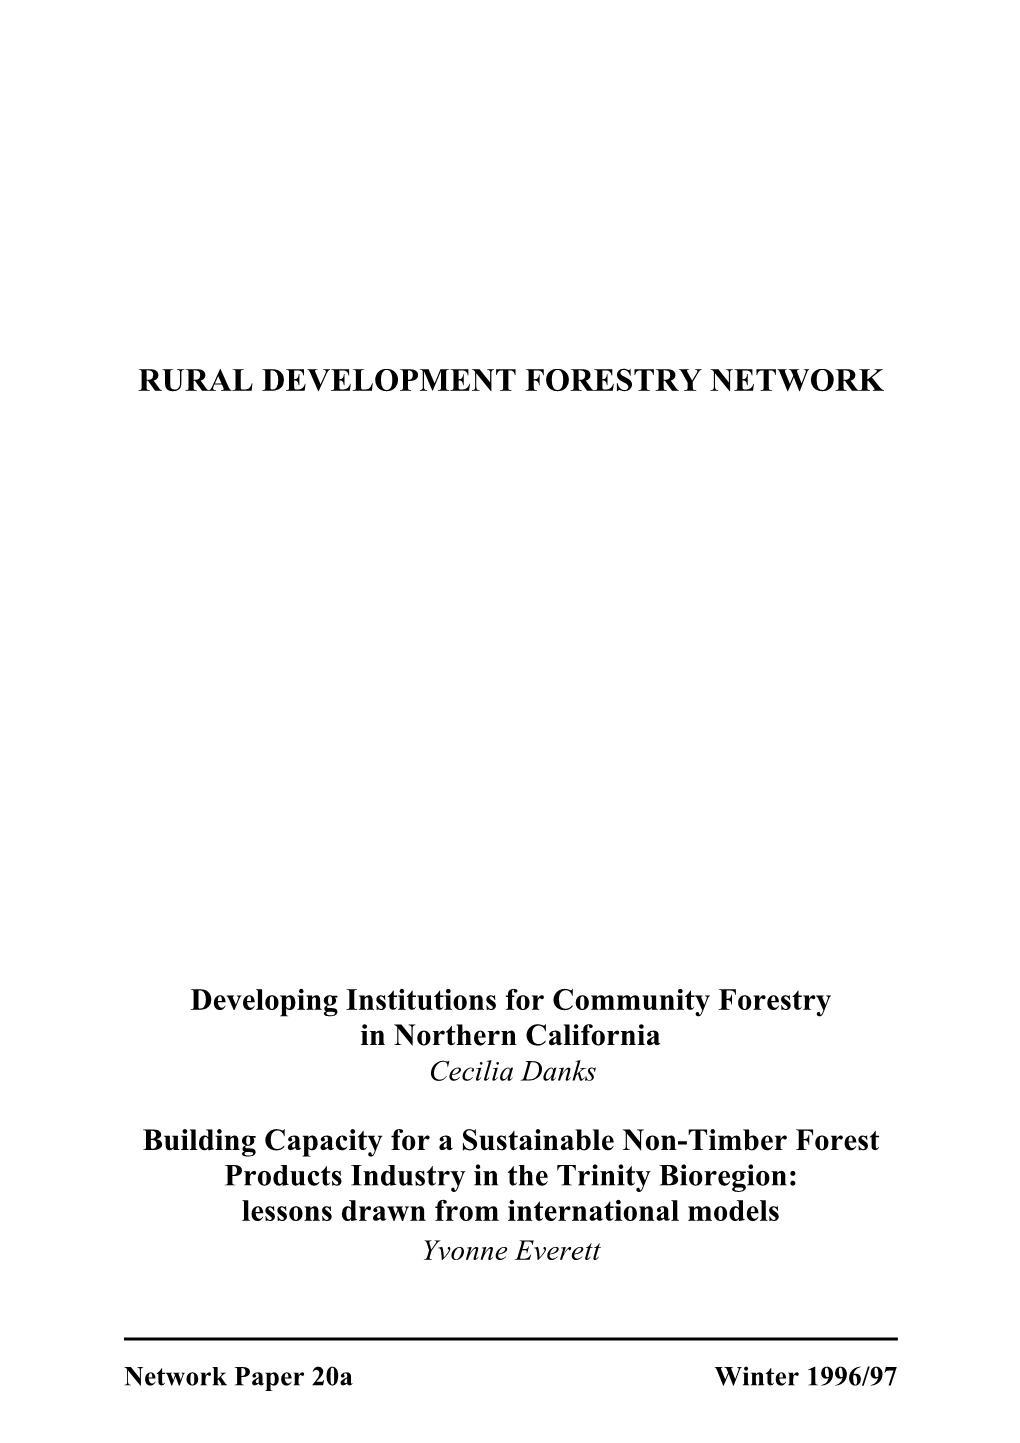 Building Capacity for a Sustainable Non-Timber Forest Products Industry in the Trinity Bioregion: Lessons Drawn from International Models Yvonne Everett